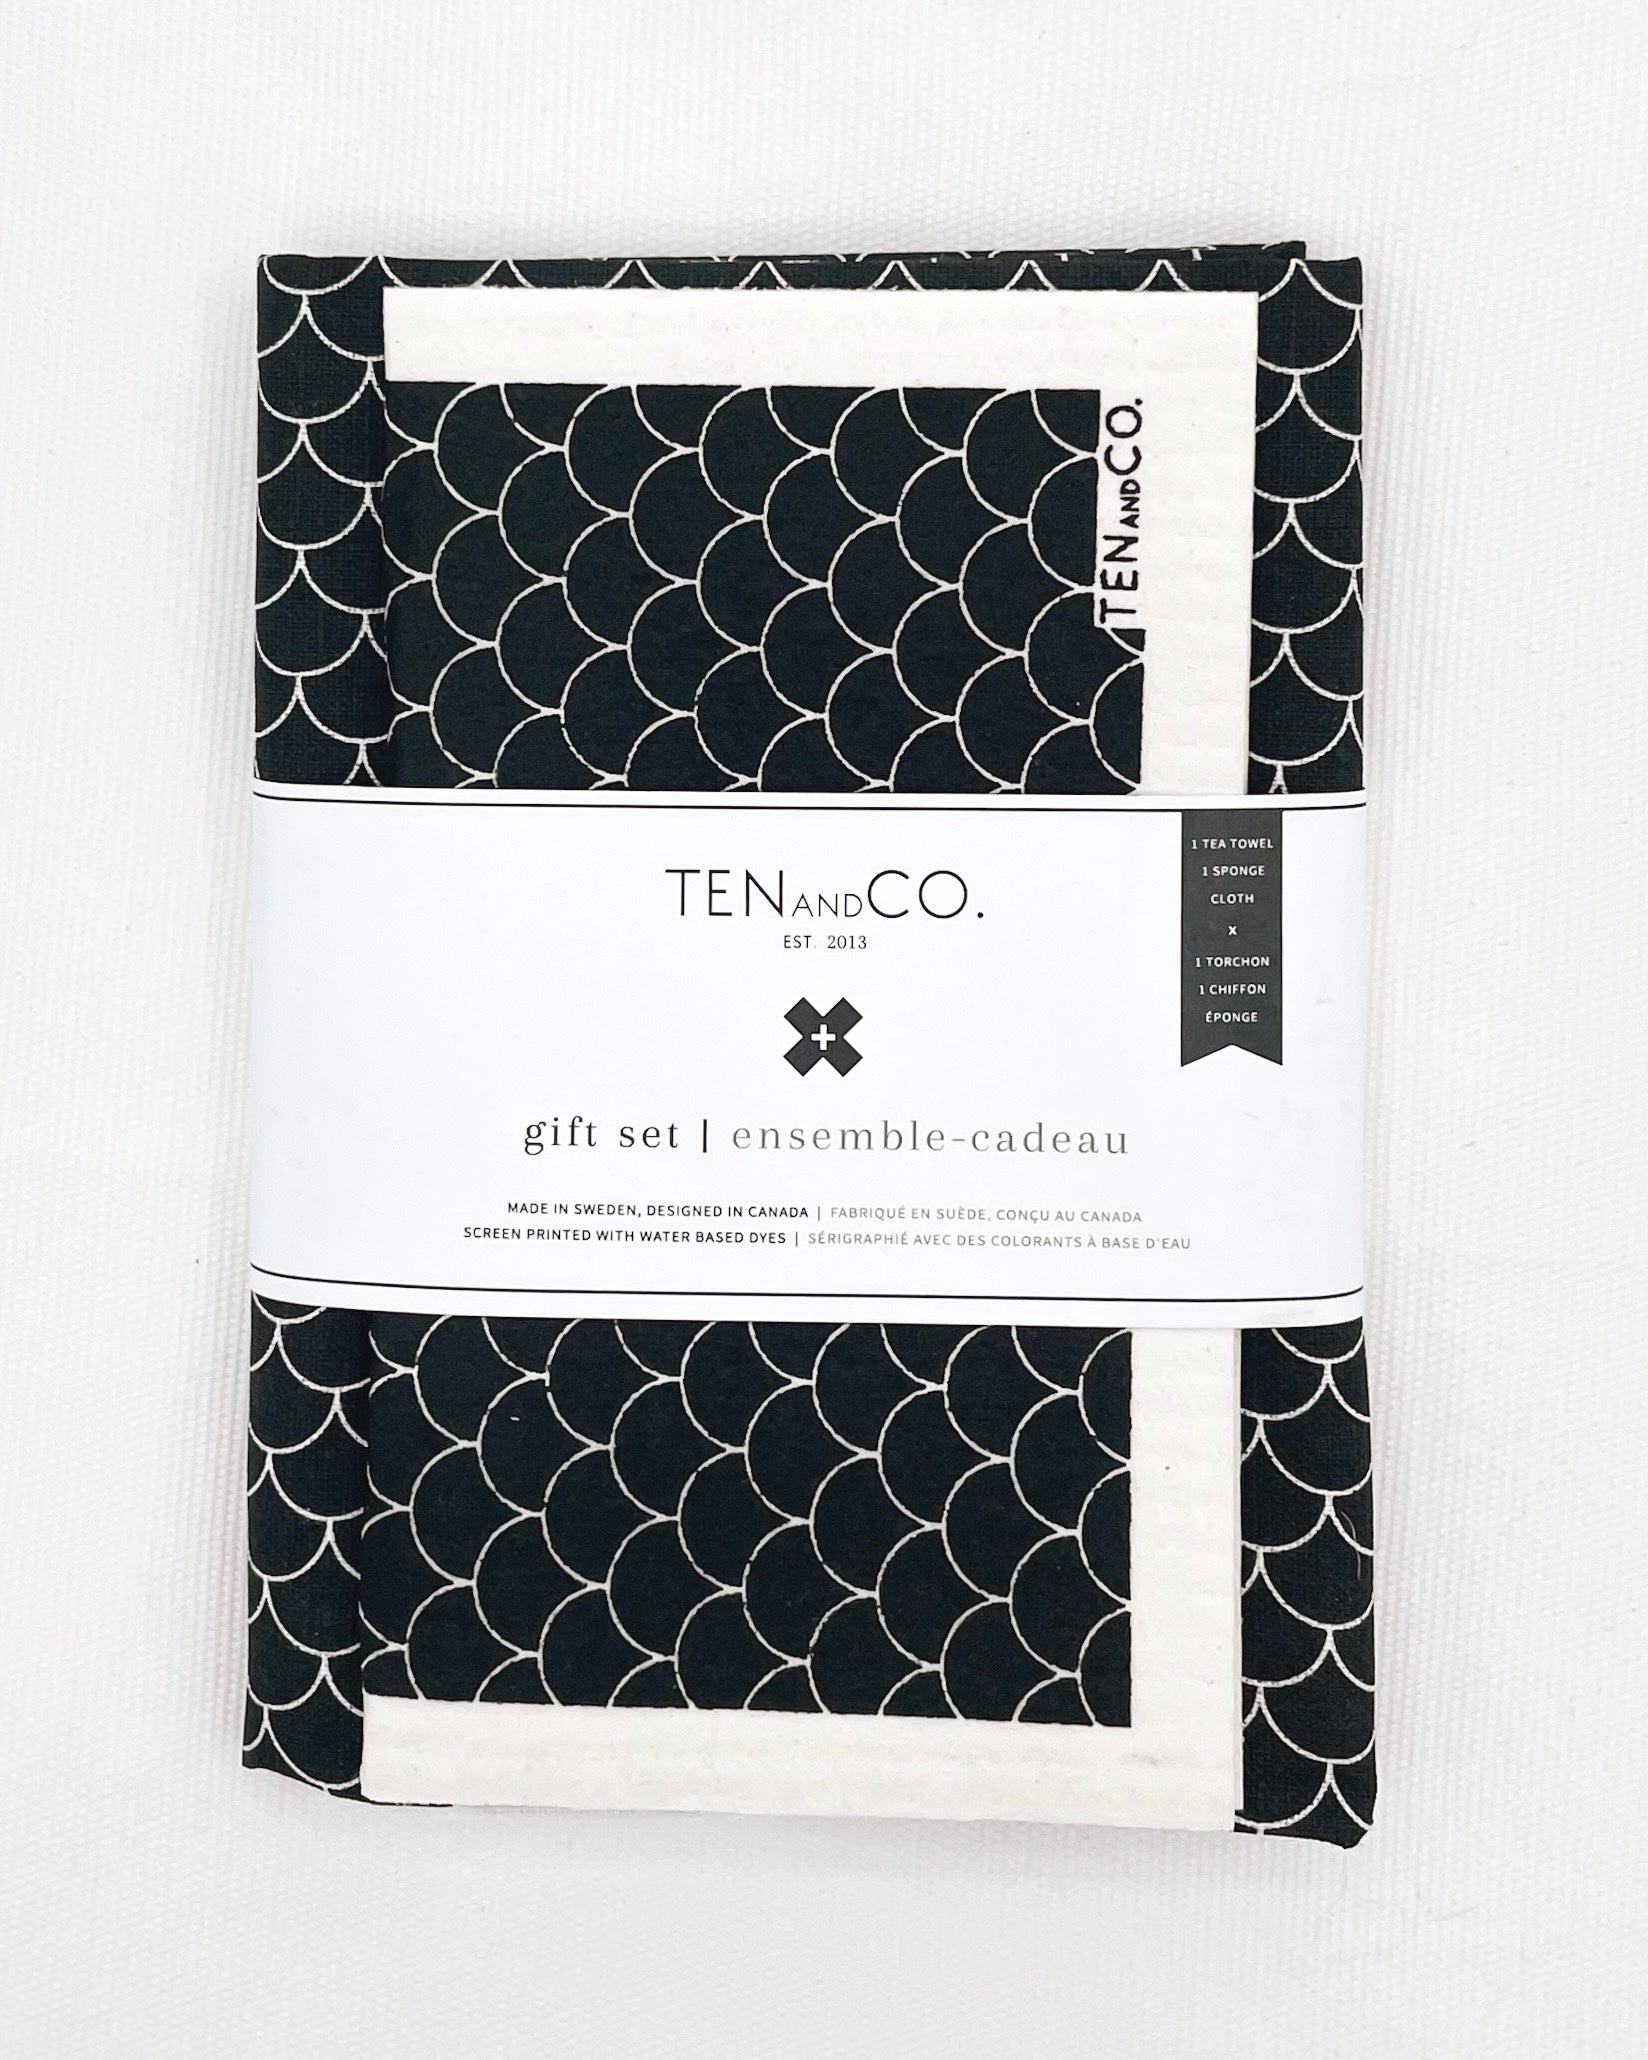 Flat lay image of Scallop Black gift set on a white background. There is a Scallop Black sponge cloth folded with a Scallop Black tea towel behind it. There is a white belly band across both. The sponge cloth has a white base with a black background that has white scallops throughout. The tea towel has a white base with black background and white scallops throughout. The belly band has the Ten and Co. Logo and descriptive text in black font.